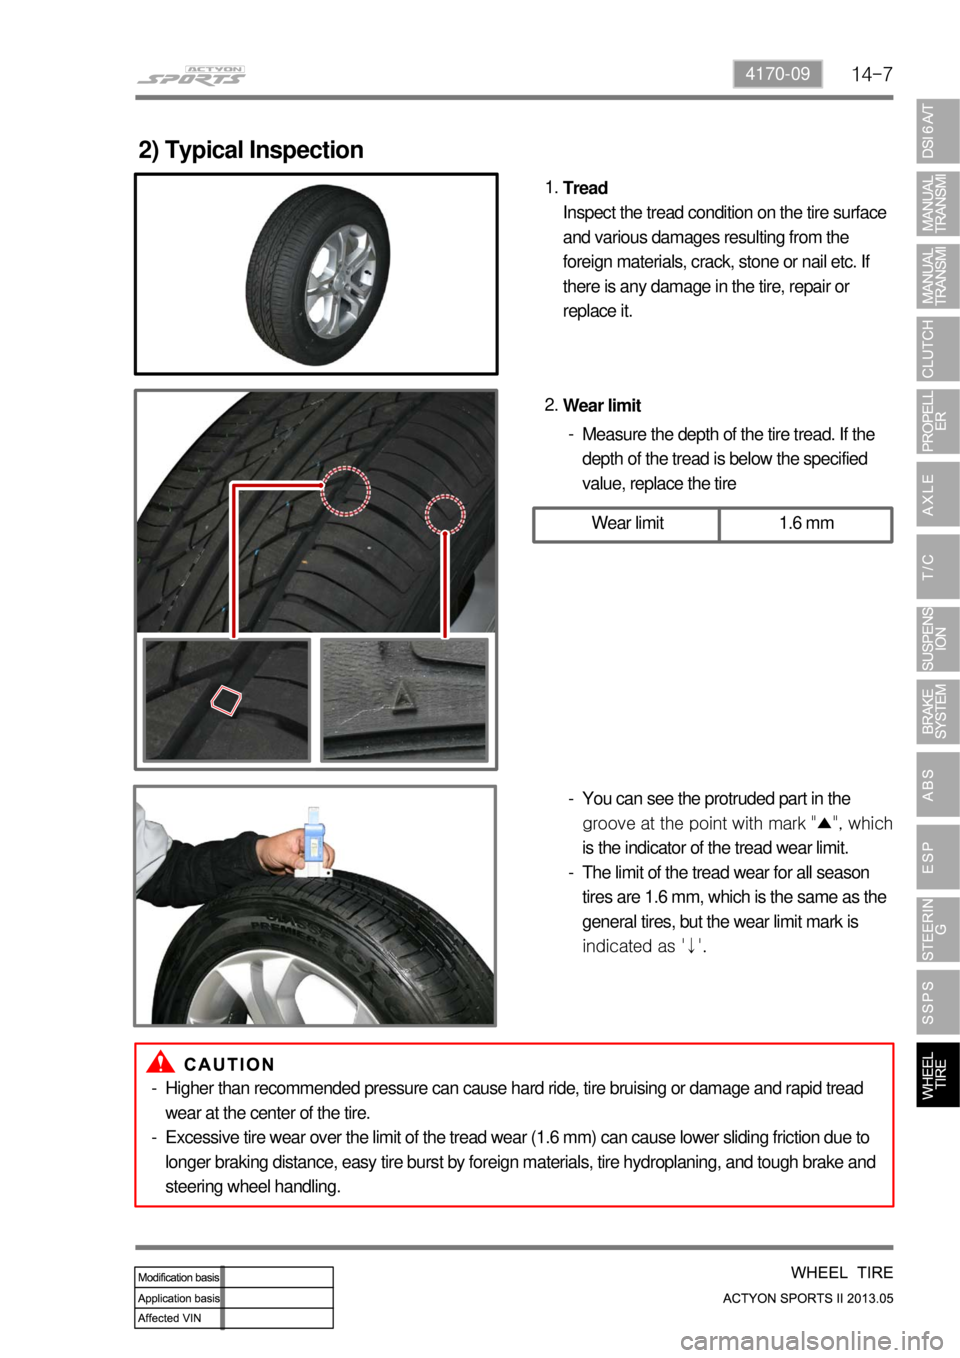 SSANGYONG NEW ACTYON SPORTS 2013  Service Manual 14-74170-09
2) Typical Inspection
Tread
Inspect the tread condition on the tire surface 
and various damages resulting from the 
foreign materials, crack, stone or nail etc. If 
there is any damage in